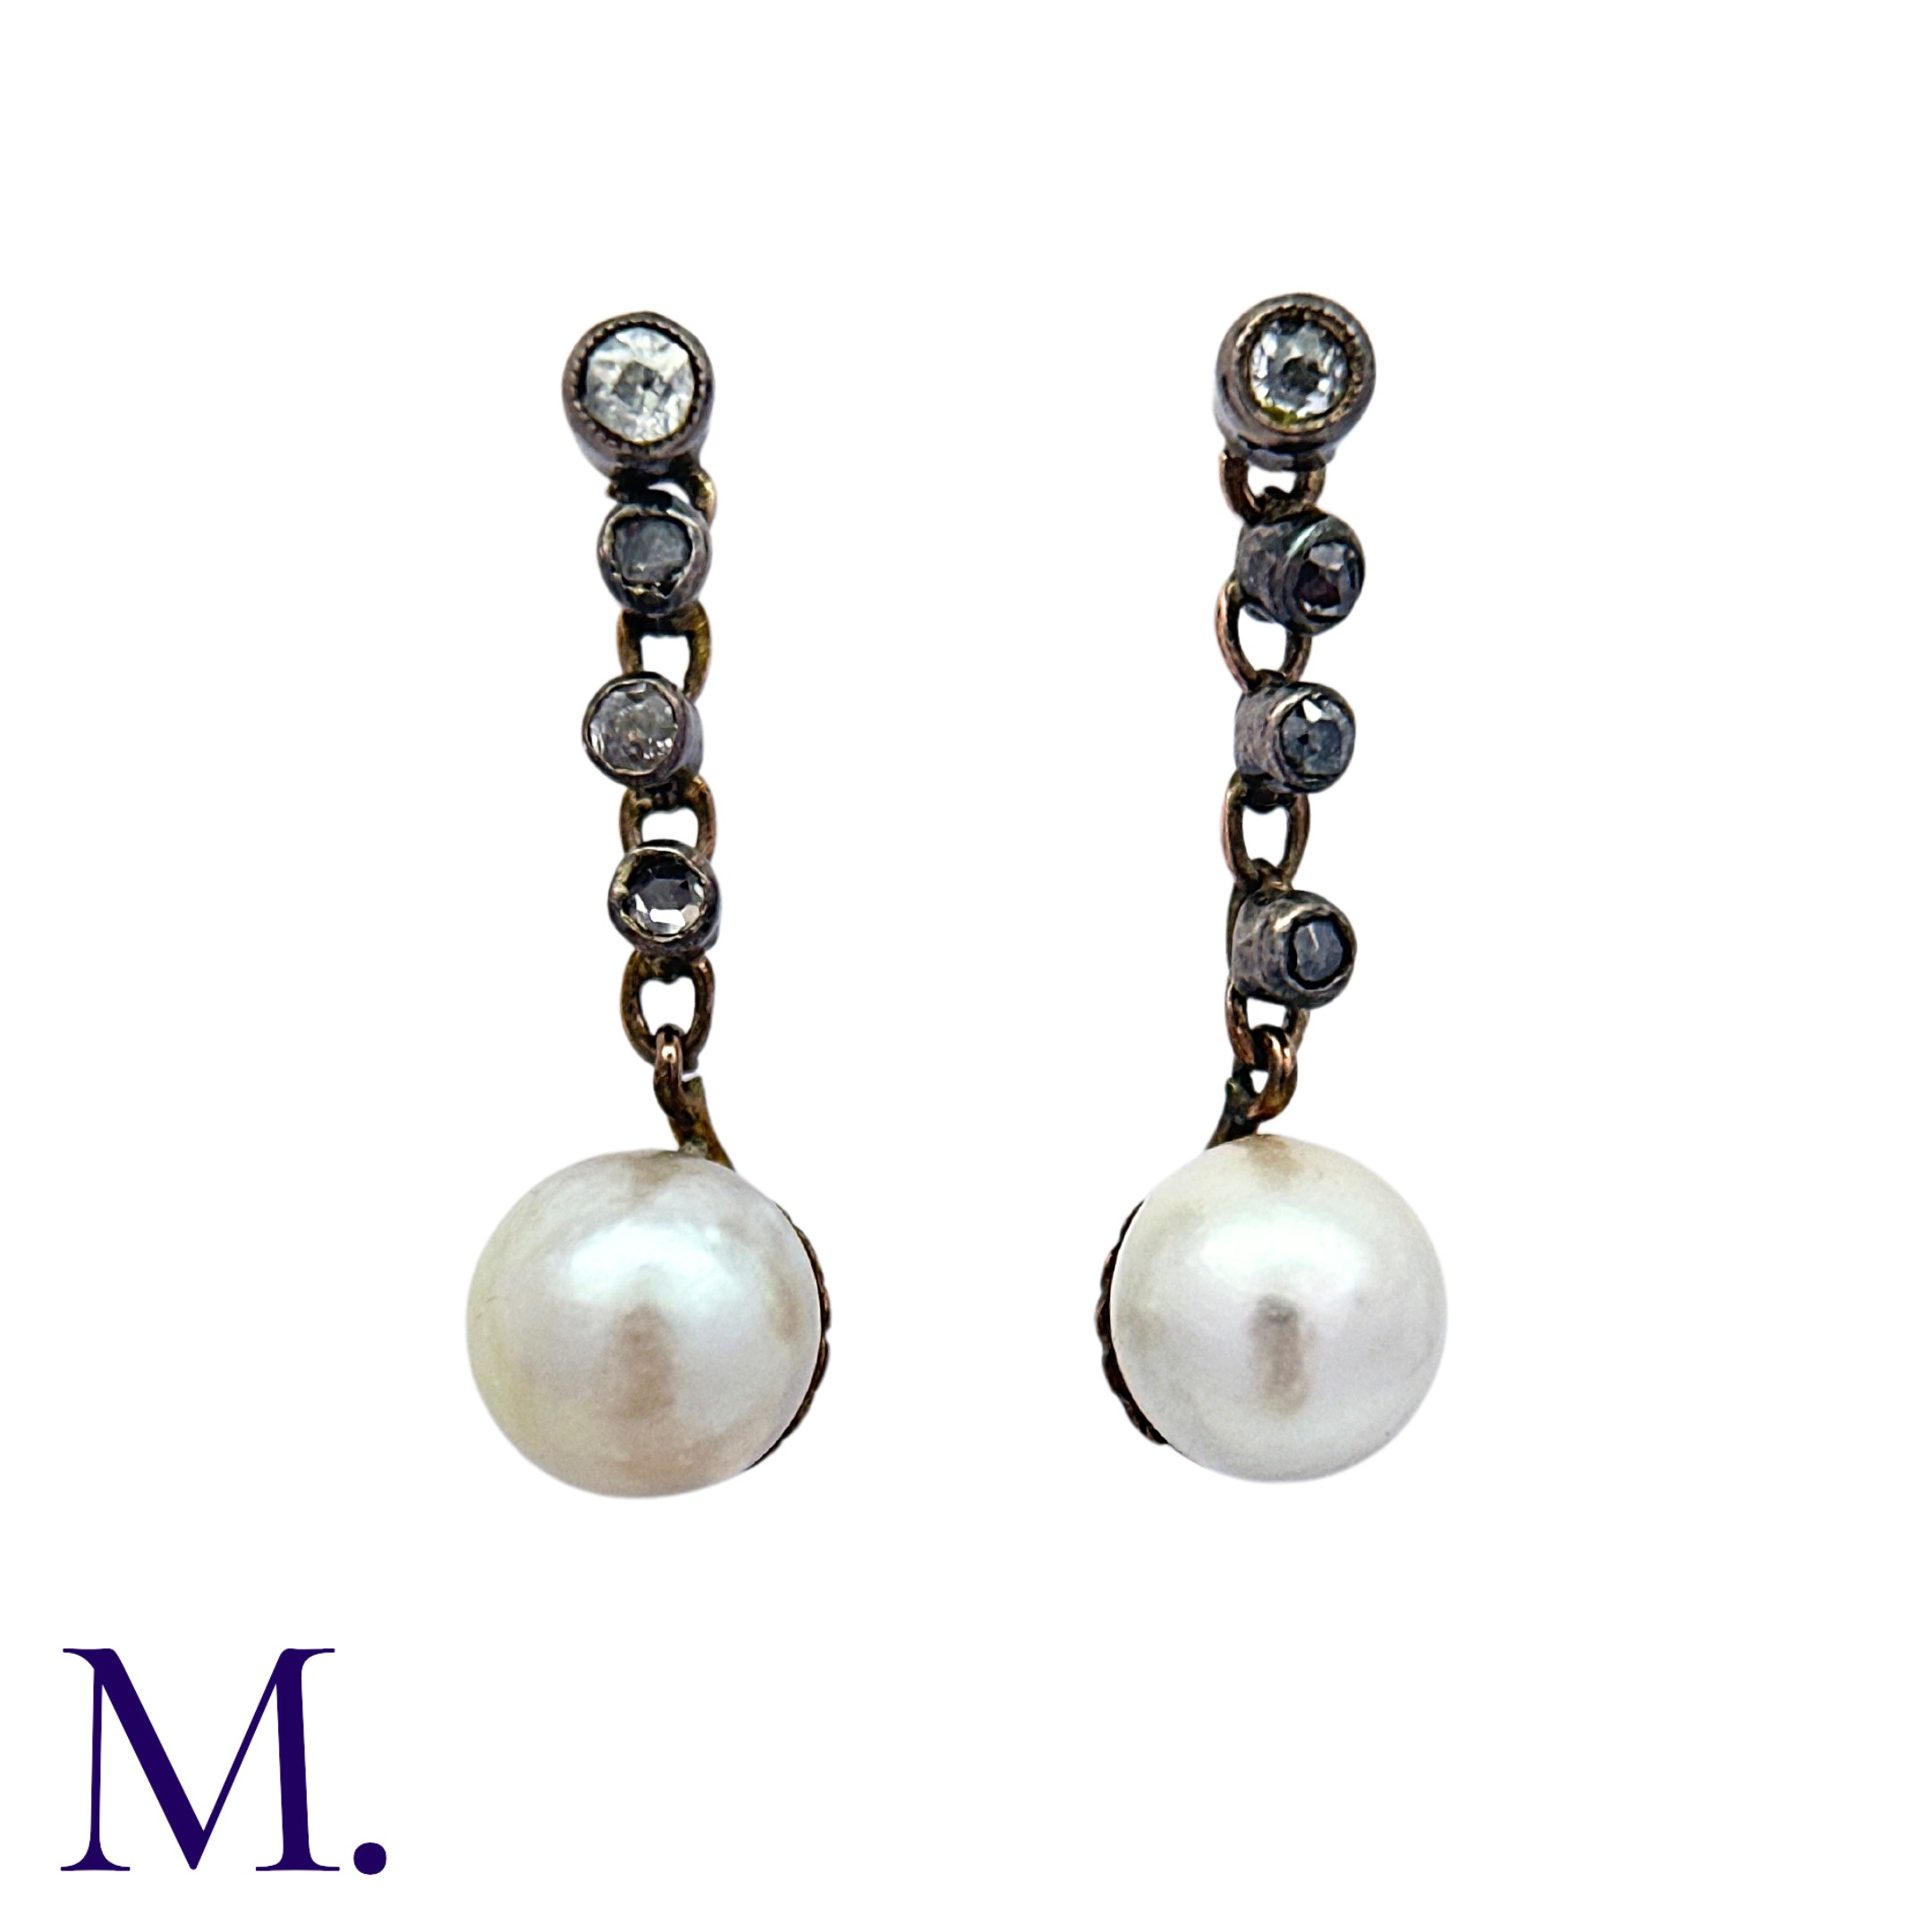 A Pair of Antique Pearl and Diamond Earrings in yellow gold and silver, each comprising an